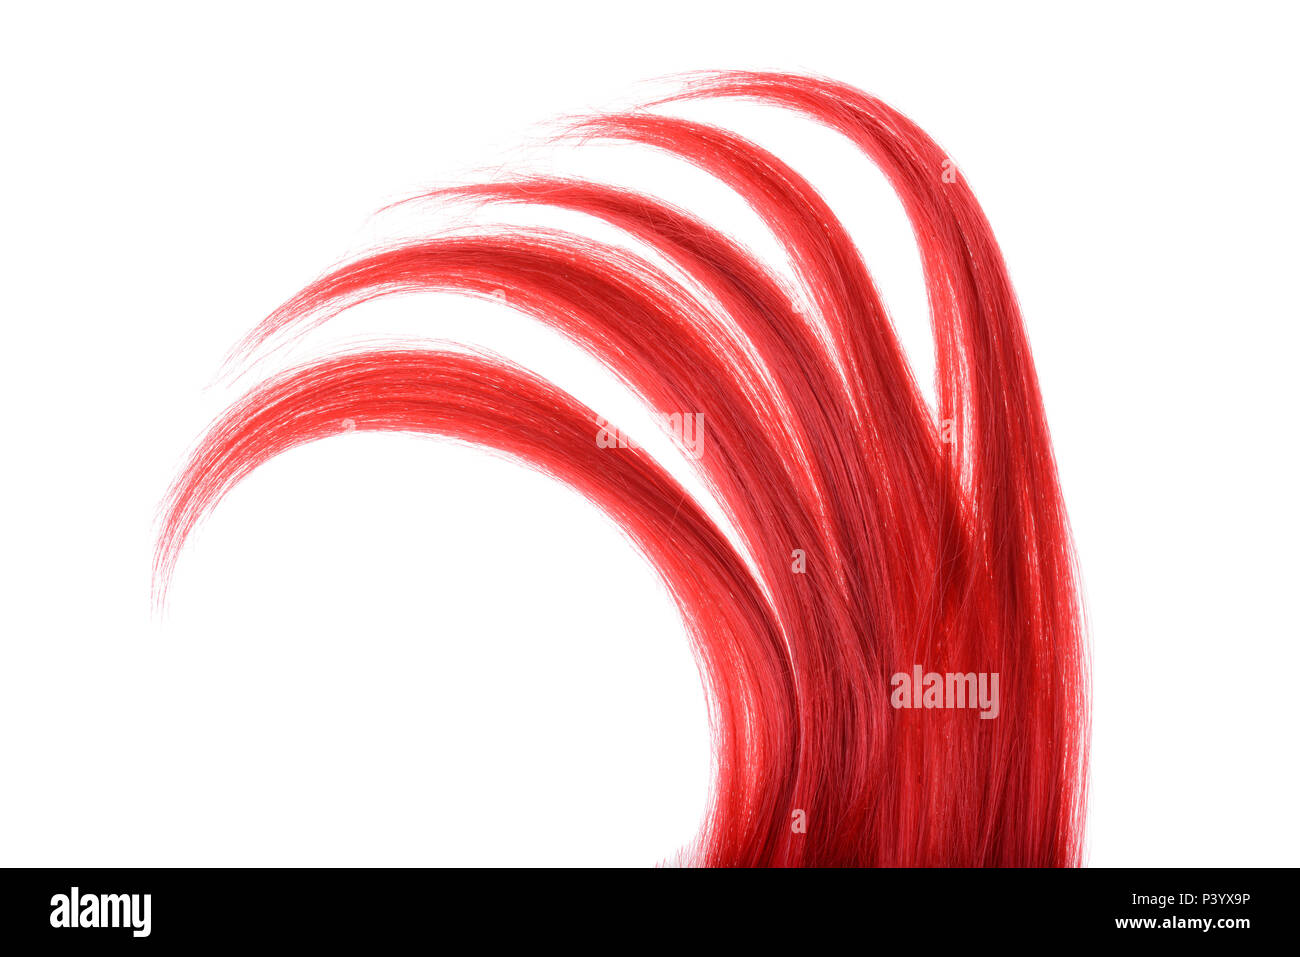 isolated piece of five sections of red hair Stock Photo